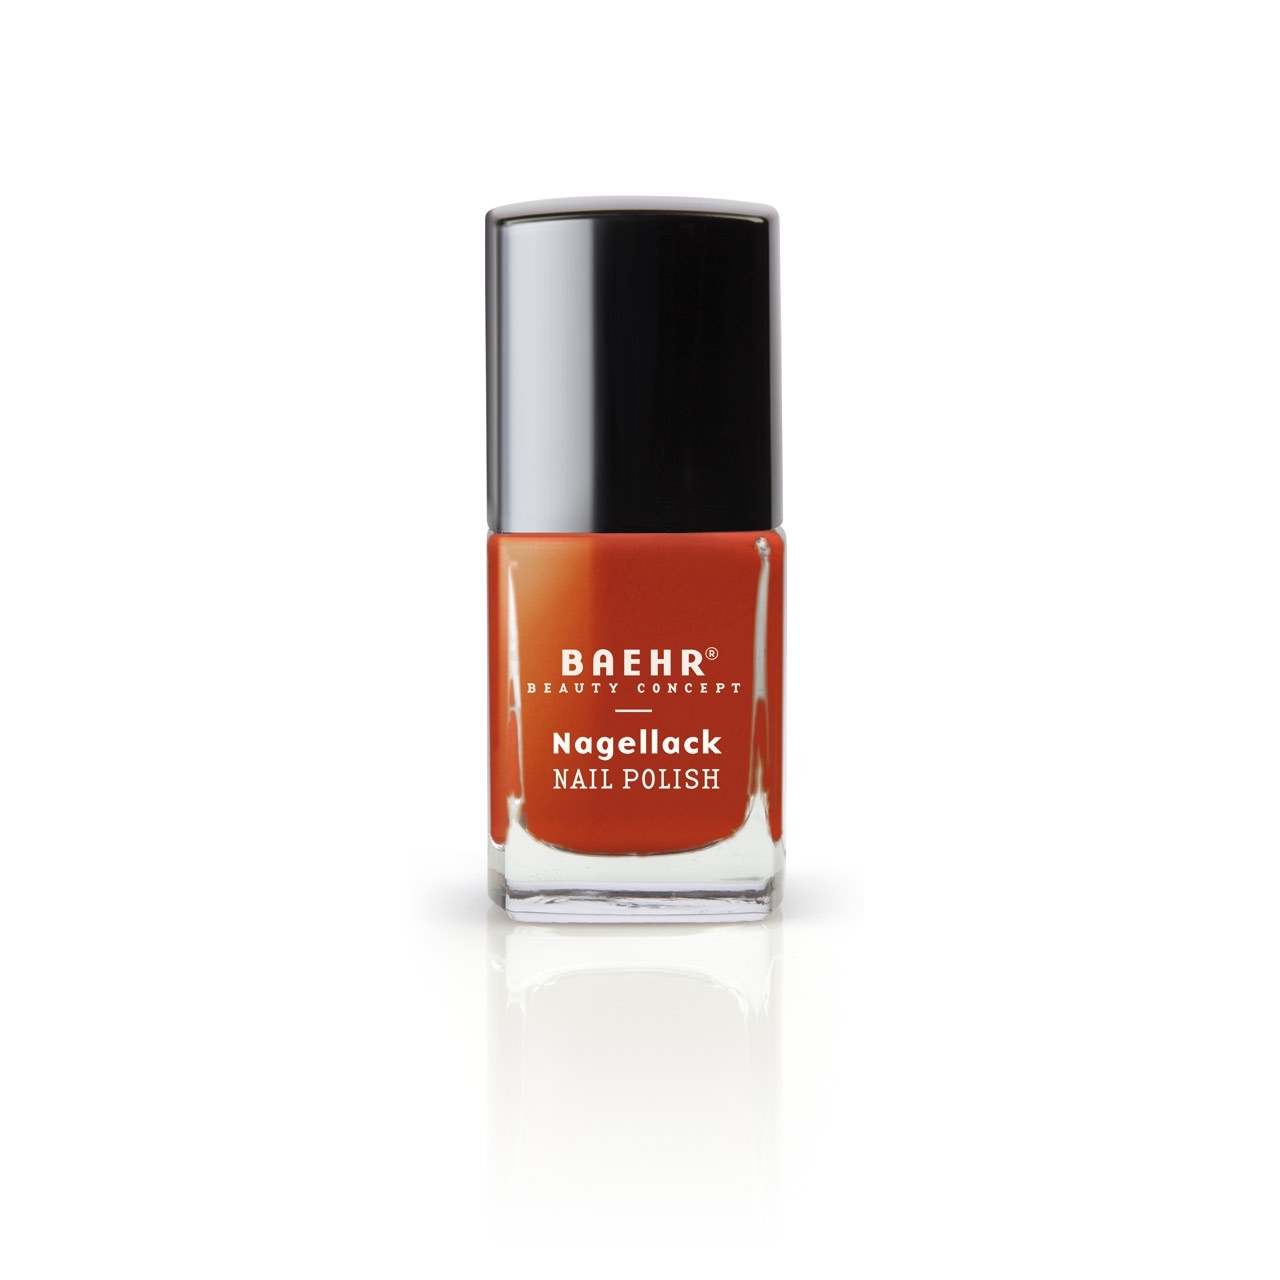 BAEHR BEAUTY CONCEPT - NAILS Nagellack coral 11 ml